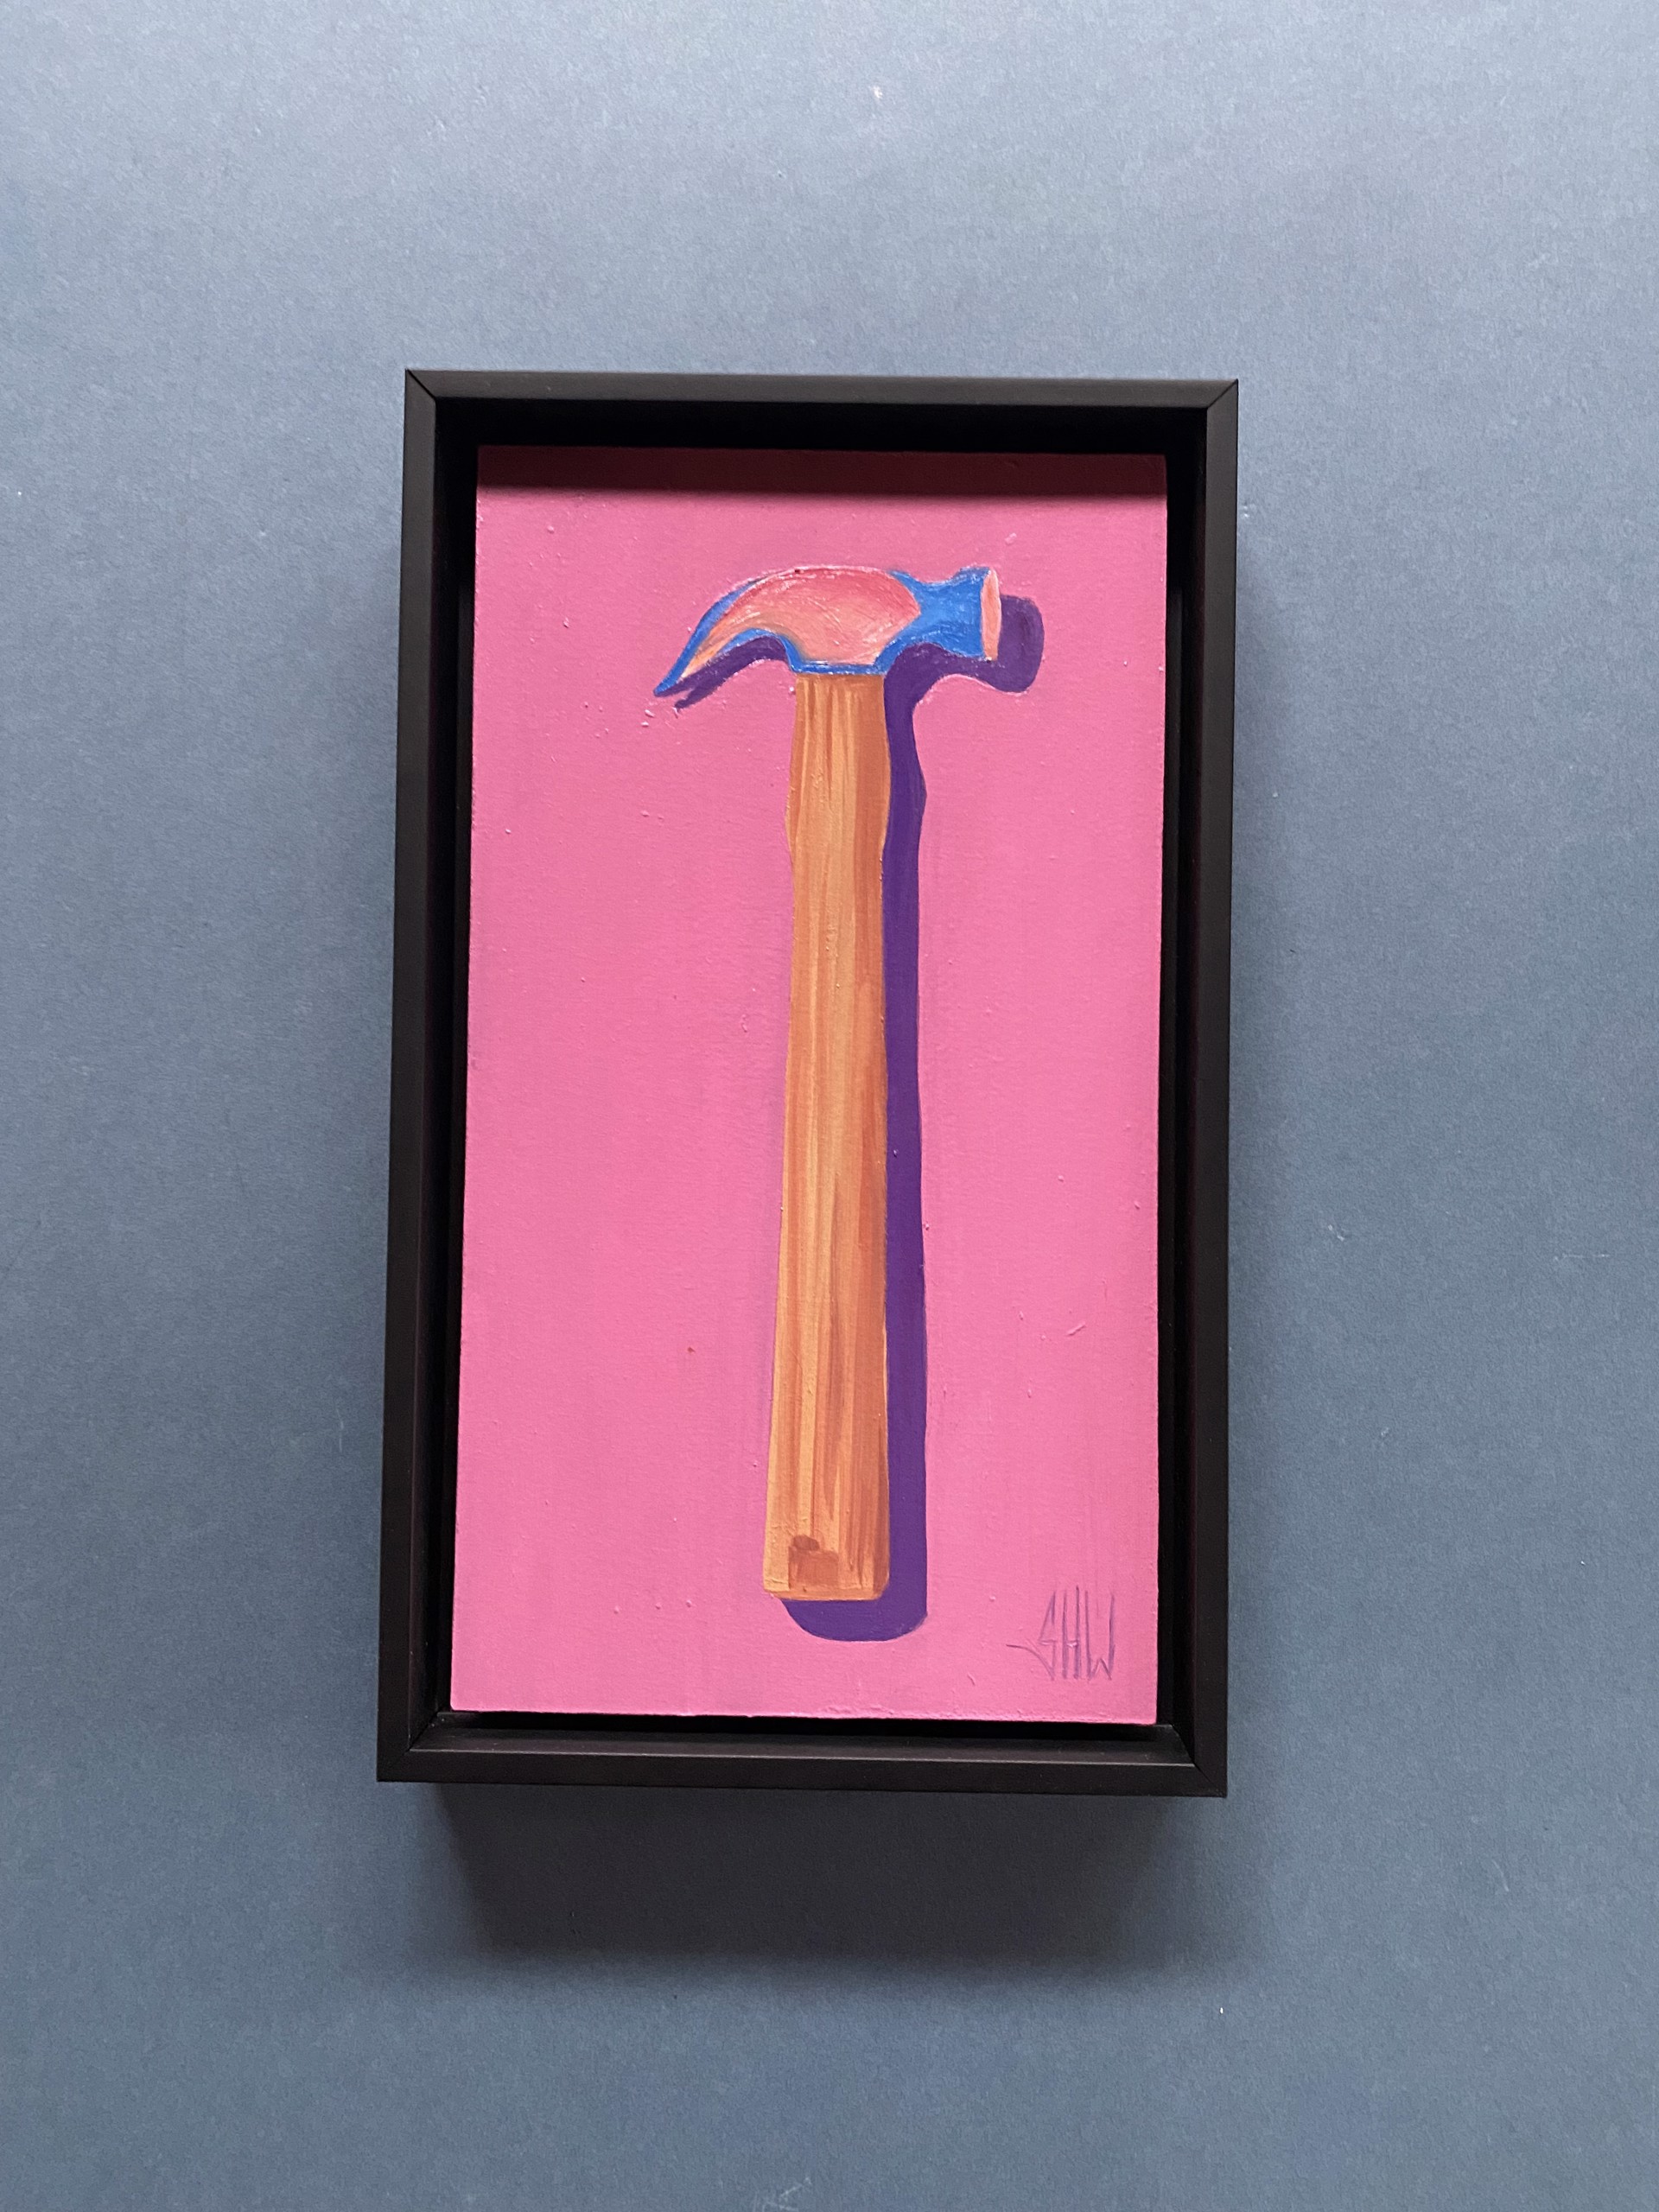 Tool No. 11 (Hammer) by Stephen Wells